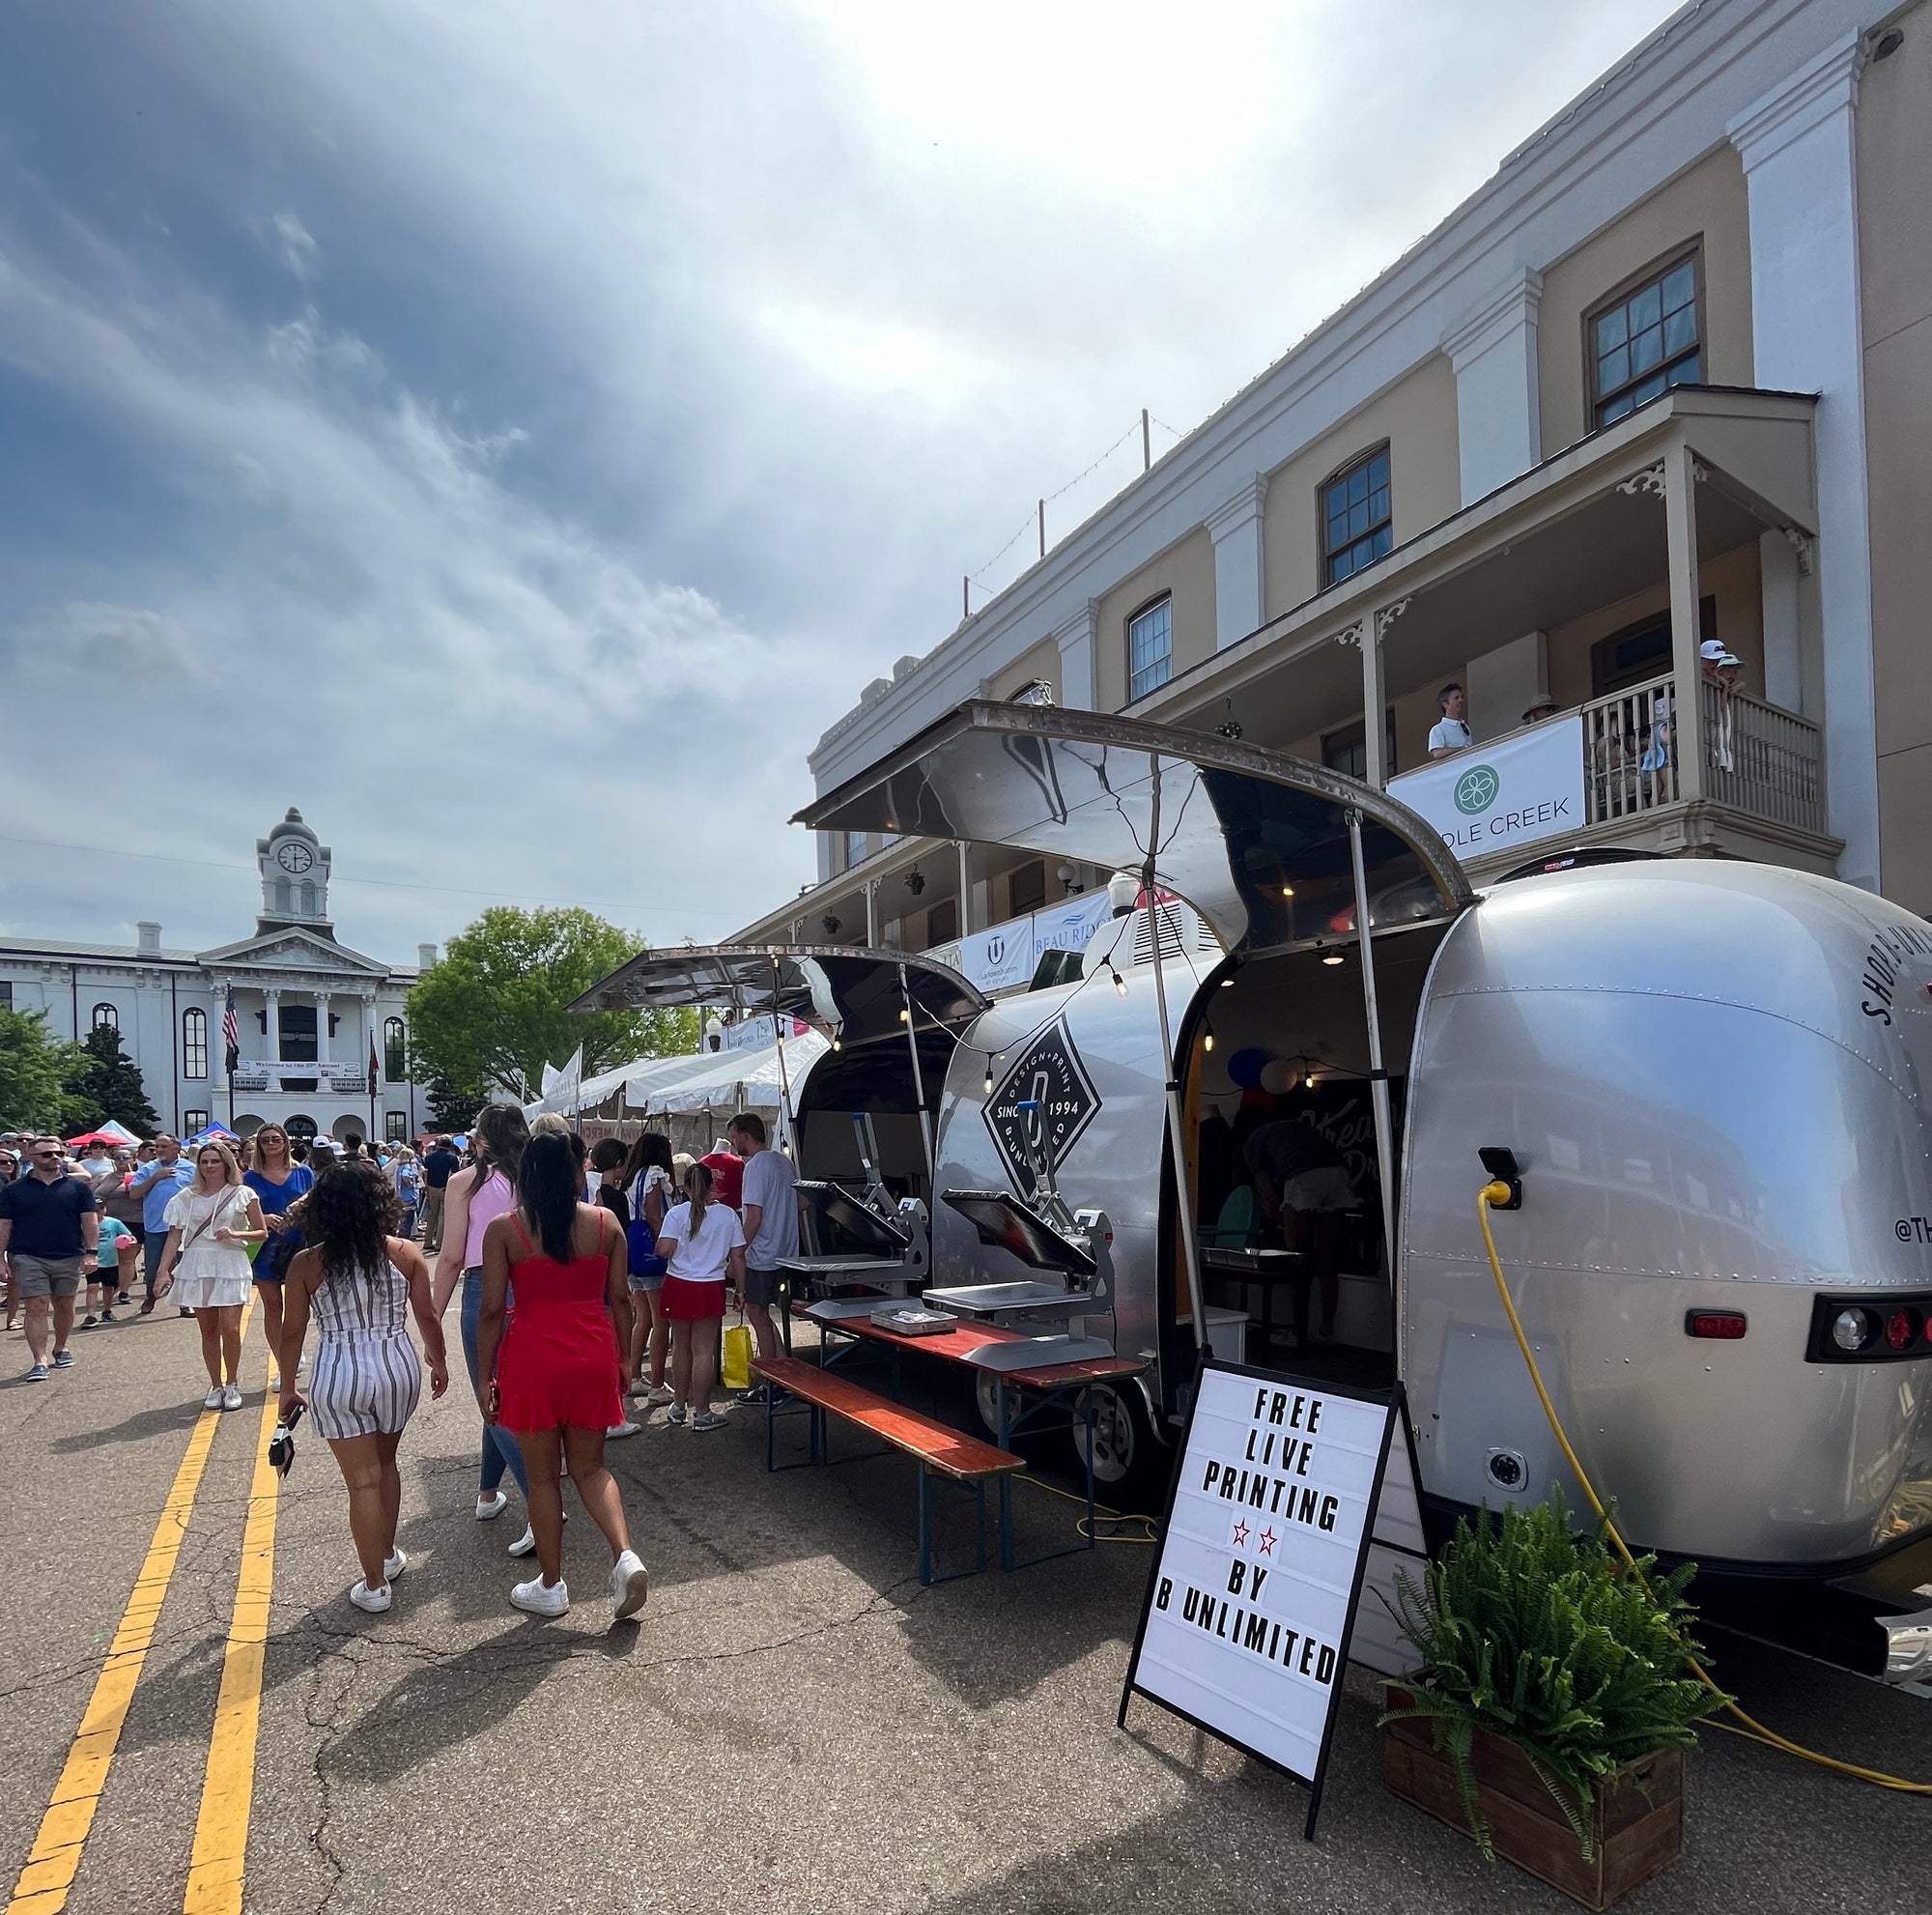 B-Unlimited is the Official Apparel Provider of Oxford's 2023 Double Decker Arts Festival